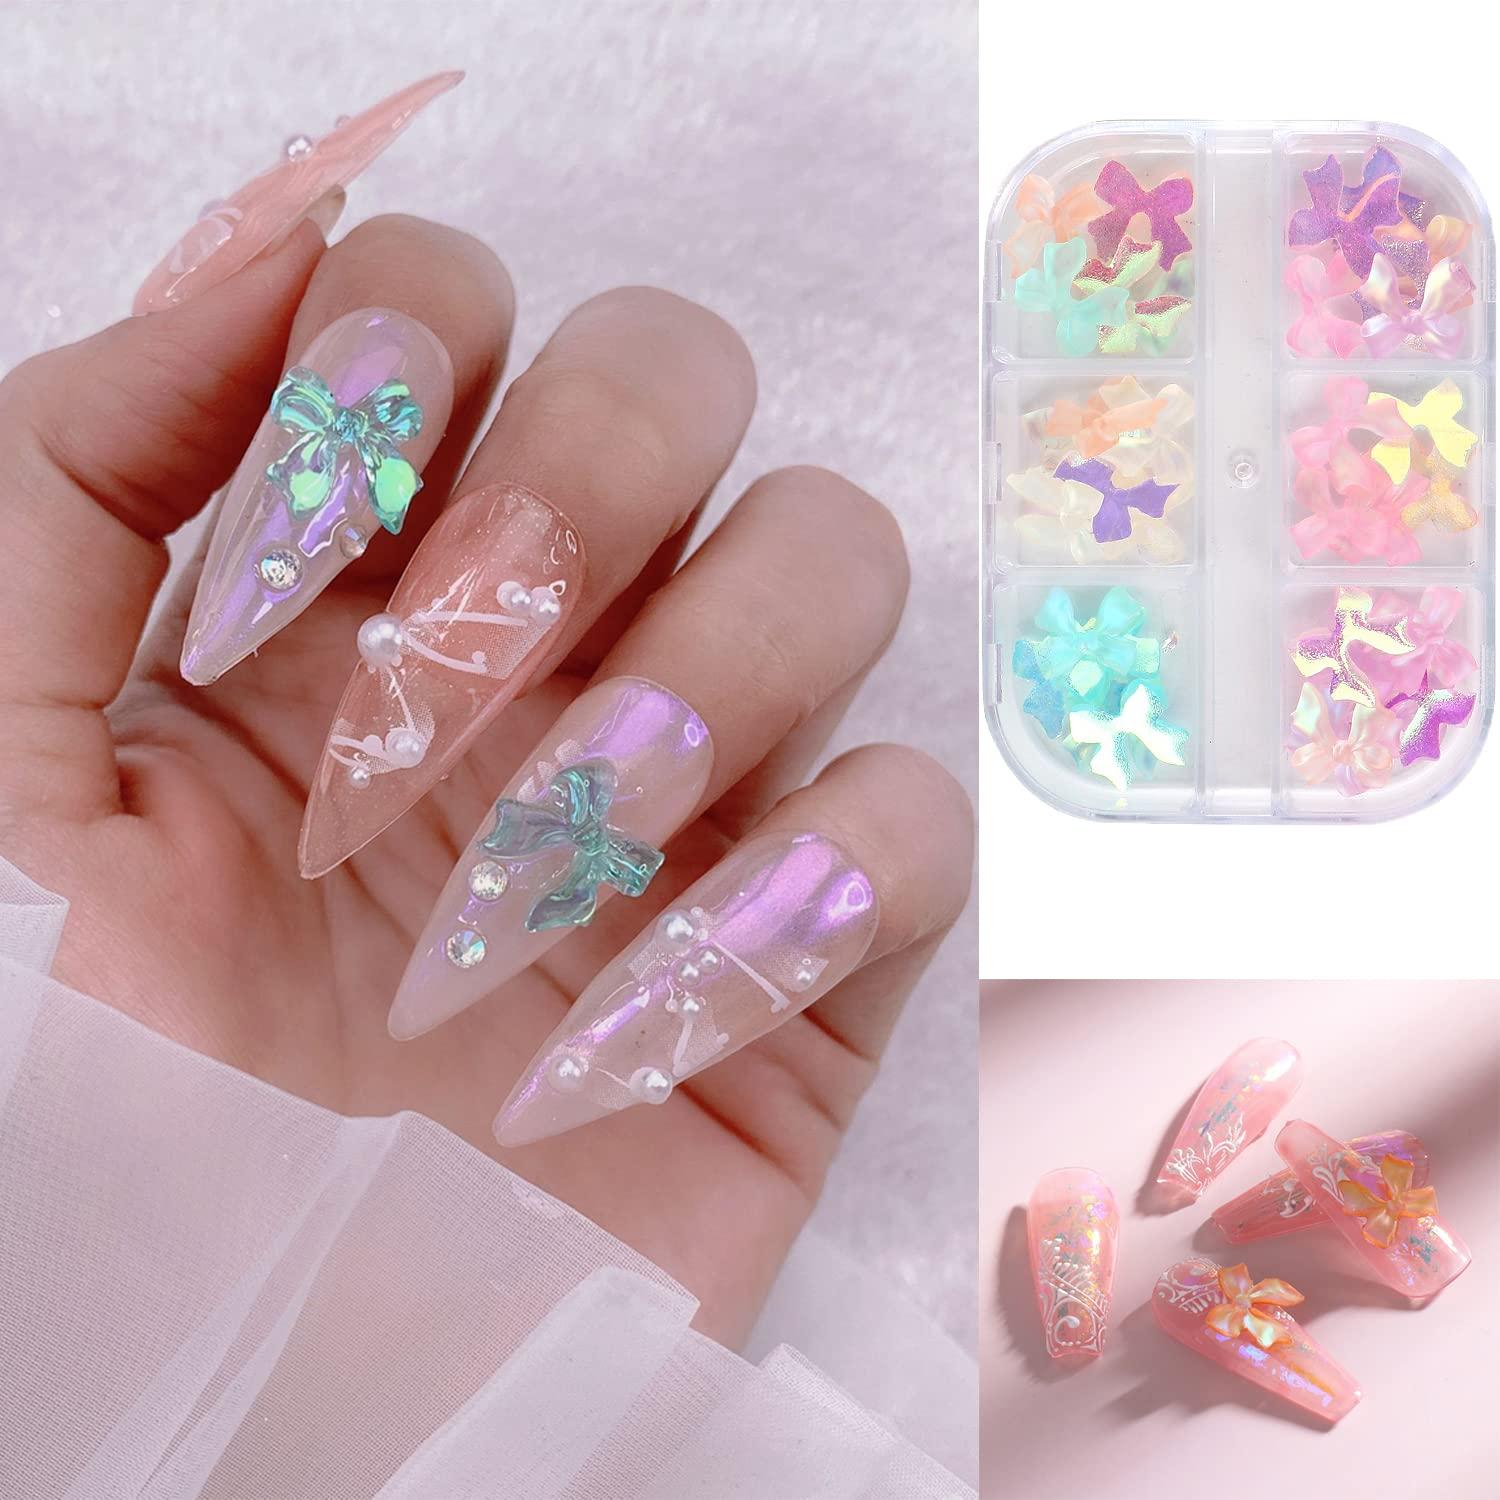 How To Apply and Super Secure Nail Art Charms, Studs, and Rhinestones 